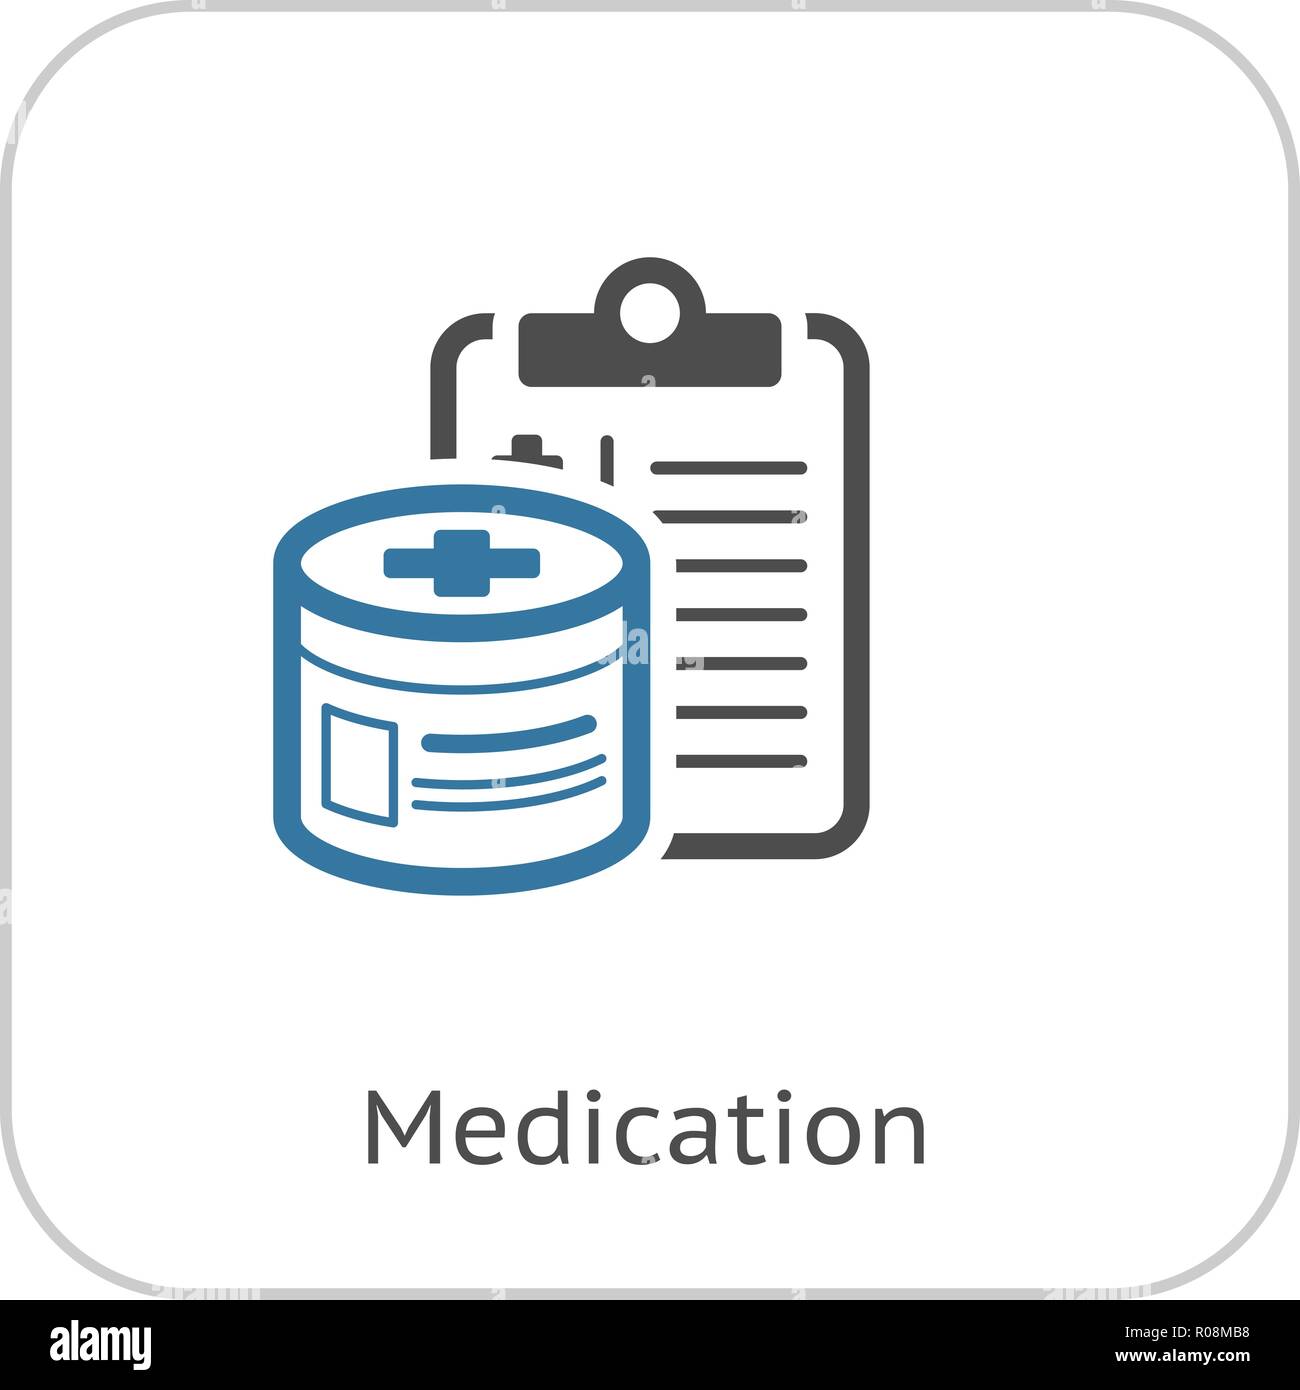 Medication and Medical Services Flat Icon Stock Vector